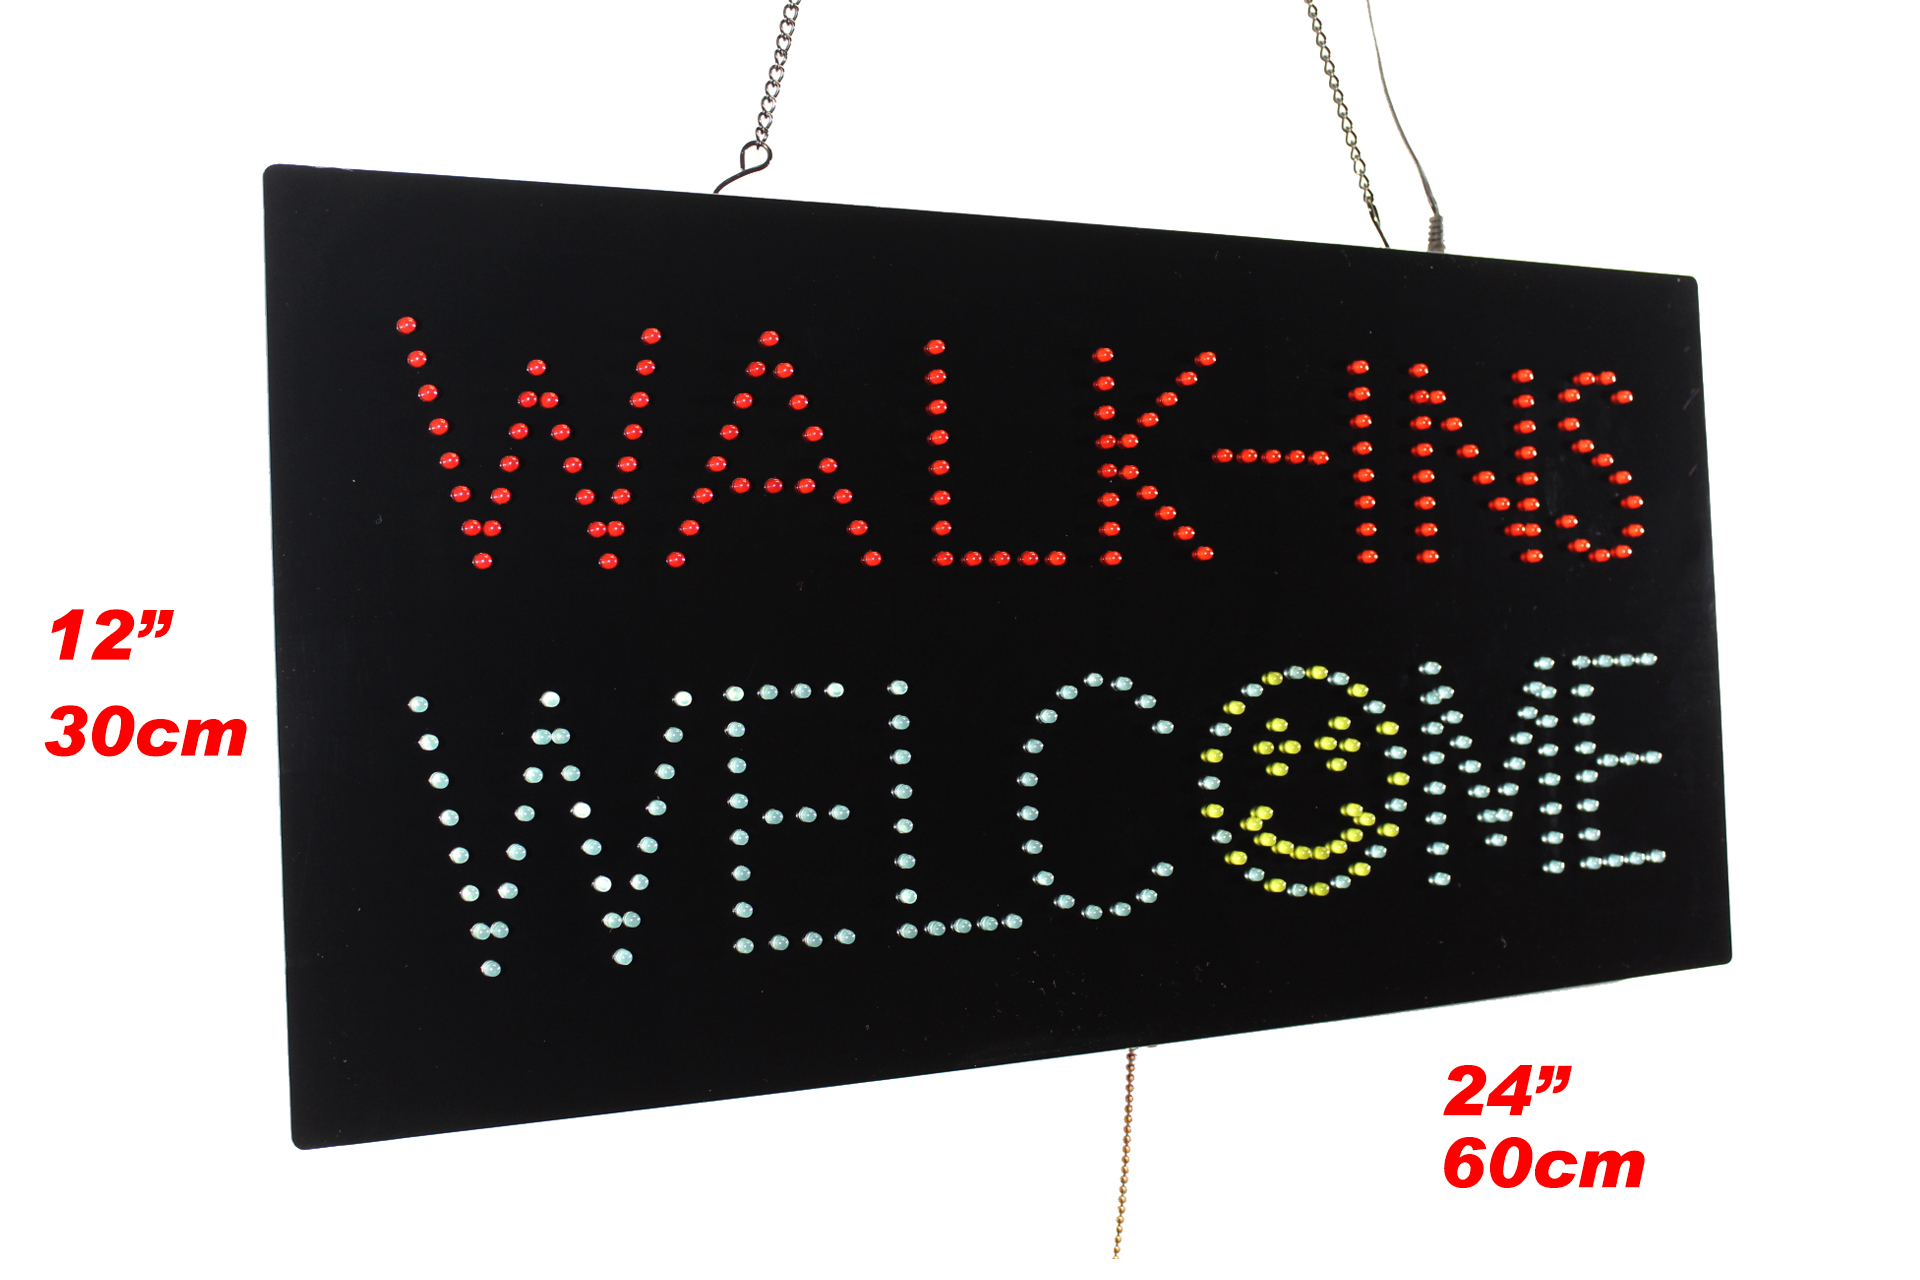 Walk-ins Welcome Sign, TOPKING Signage, LED Neon Open, Store, Window, Shop,  Business, Display, Grand Opening Gift